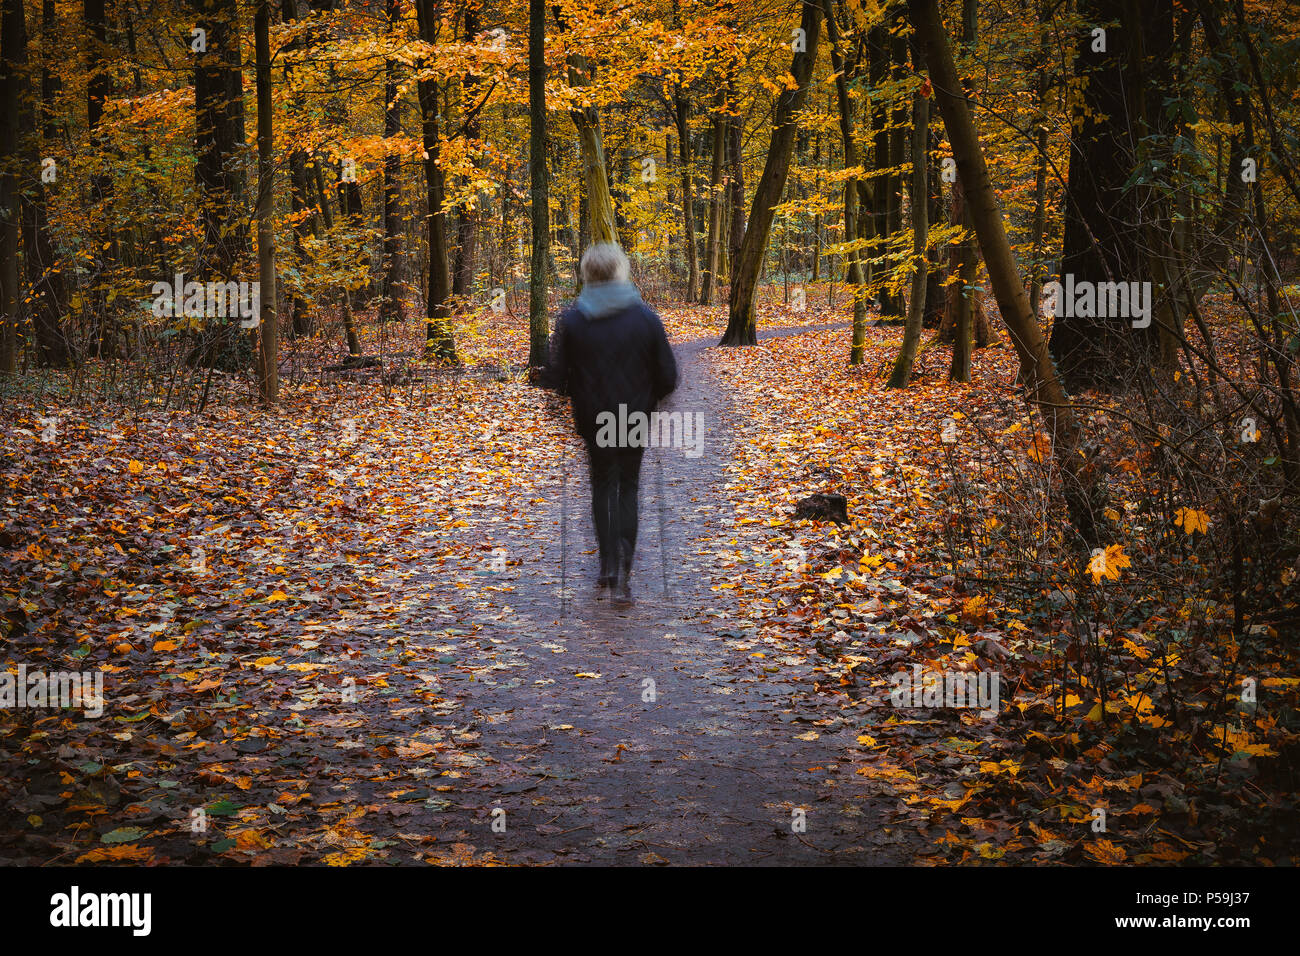 Ghostly hike figure in autumnal square, autumn forest landscape, trees with yellow leaves and alleys. Stock Photo